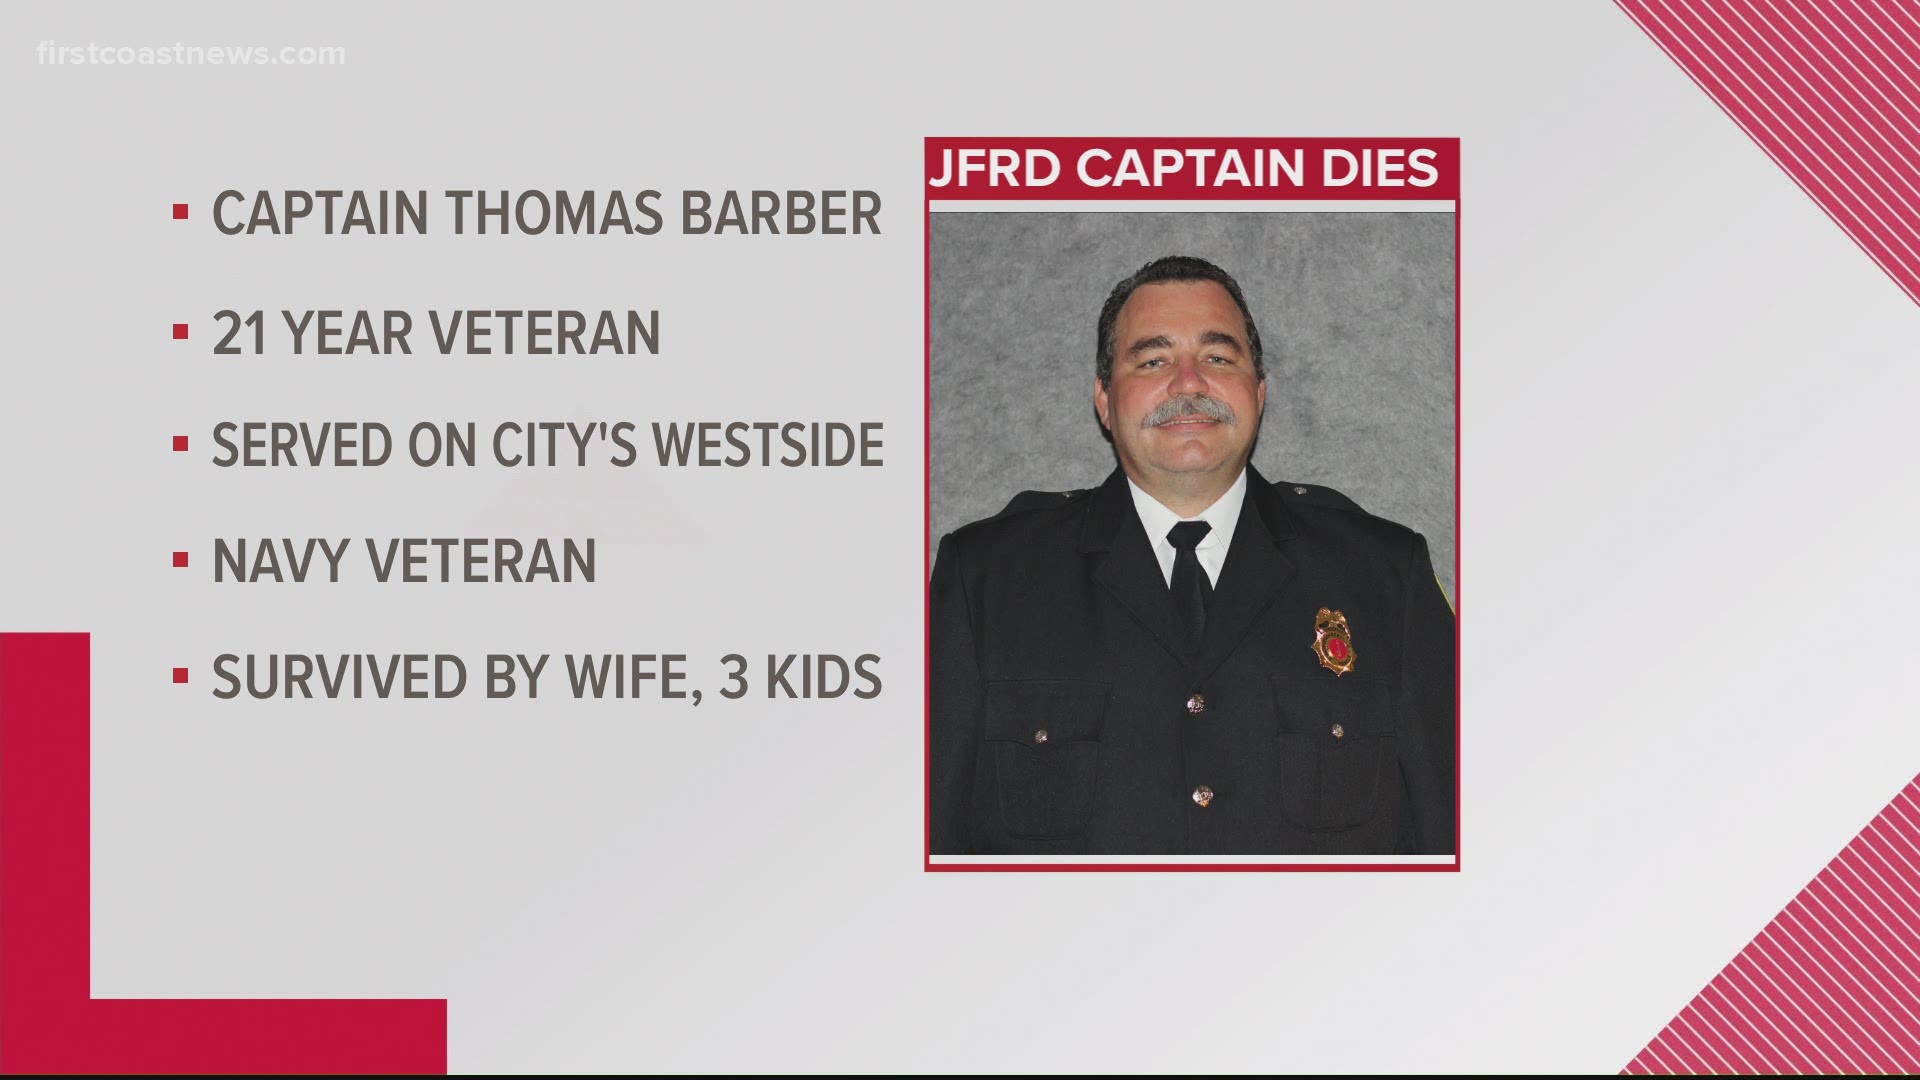 Captain Thomas Barber served 21 years at the Jacksonville Fire and Rescue Department. He also served in the US Navy.